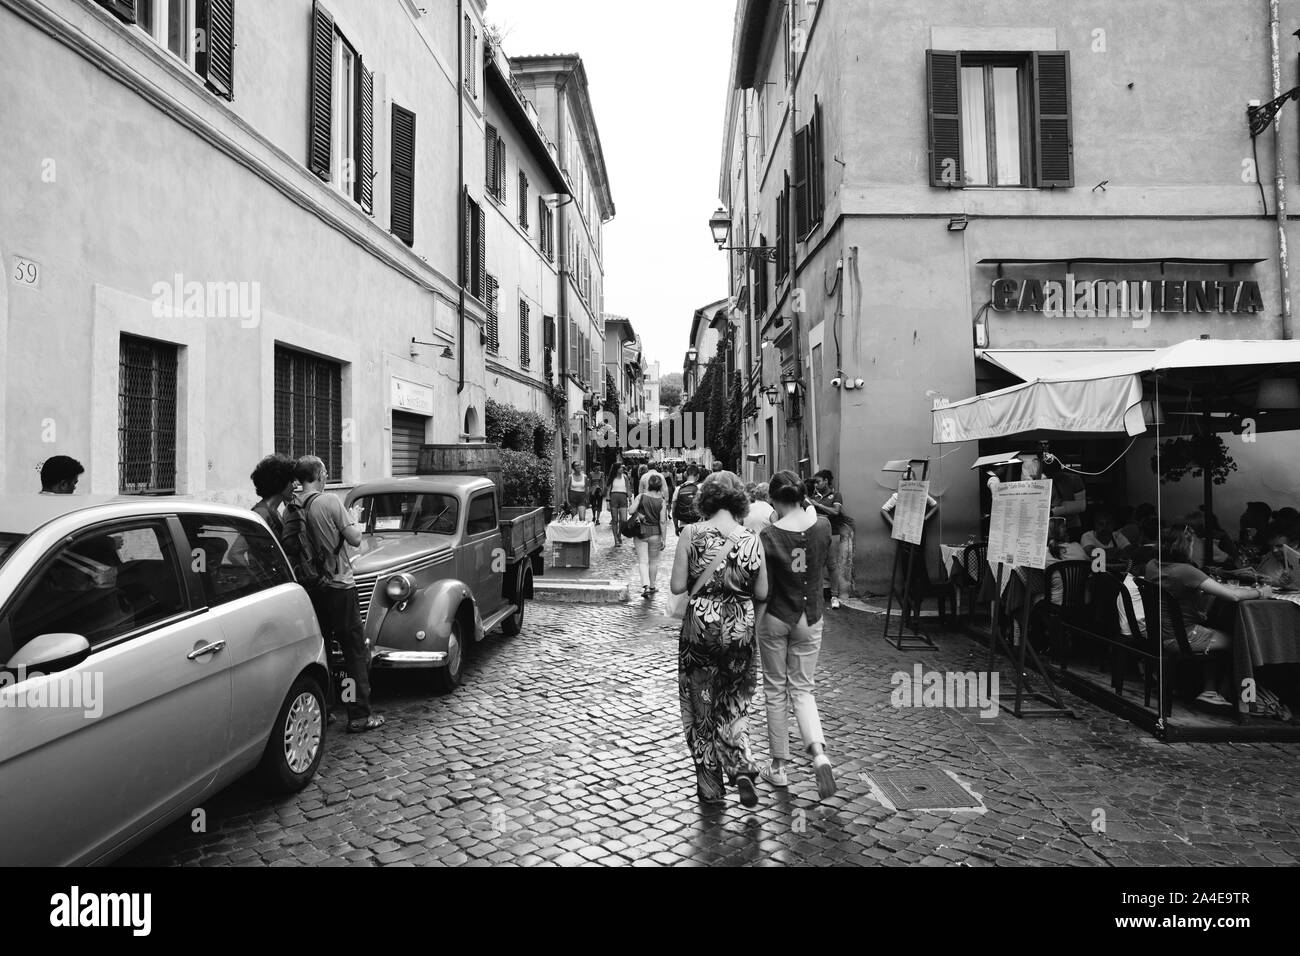 Rome, Italy - June 23, 2018: Panoramic view of Trastevere is 13th district of Rome on west bank of the Tiber, south of Vatican City. People walk and r Stock Photo